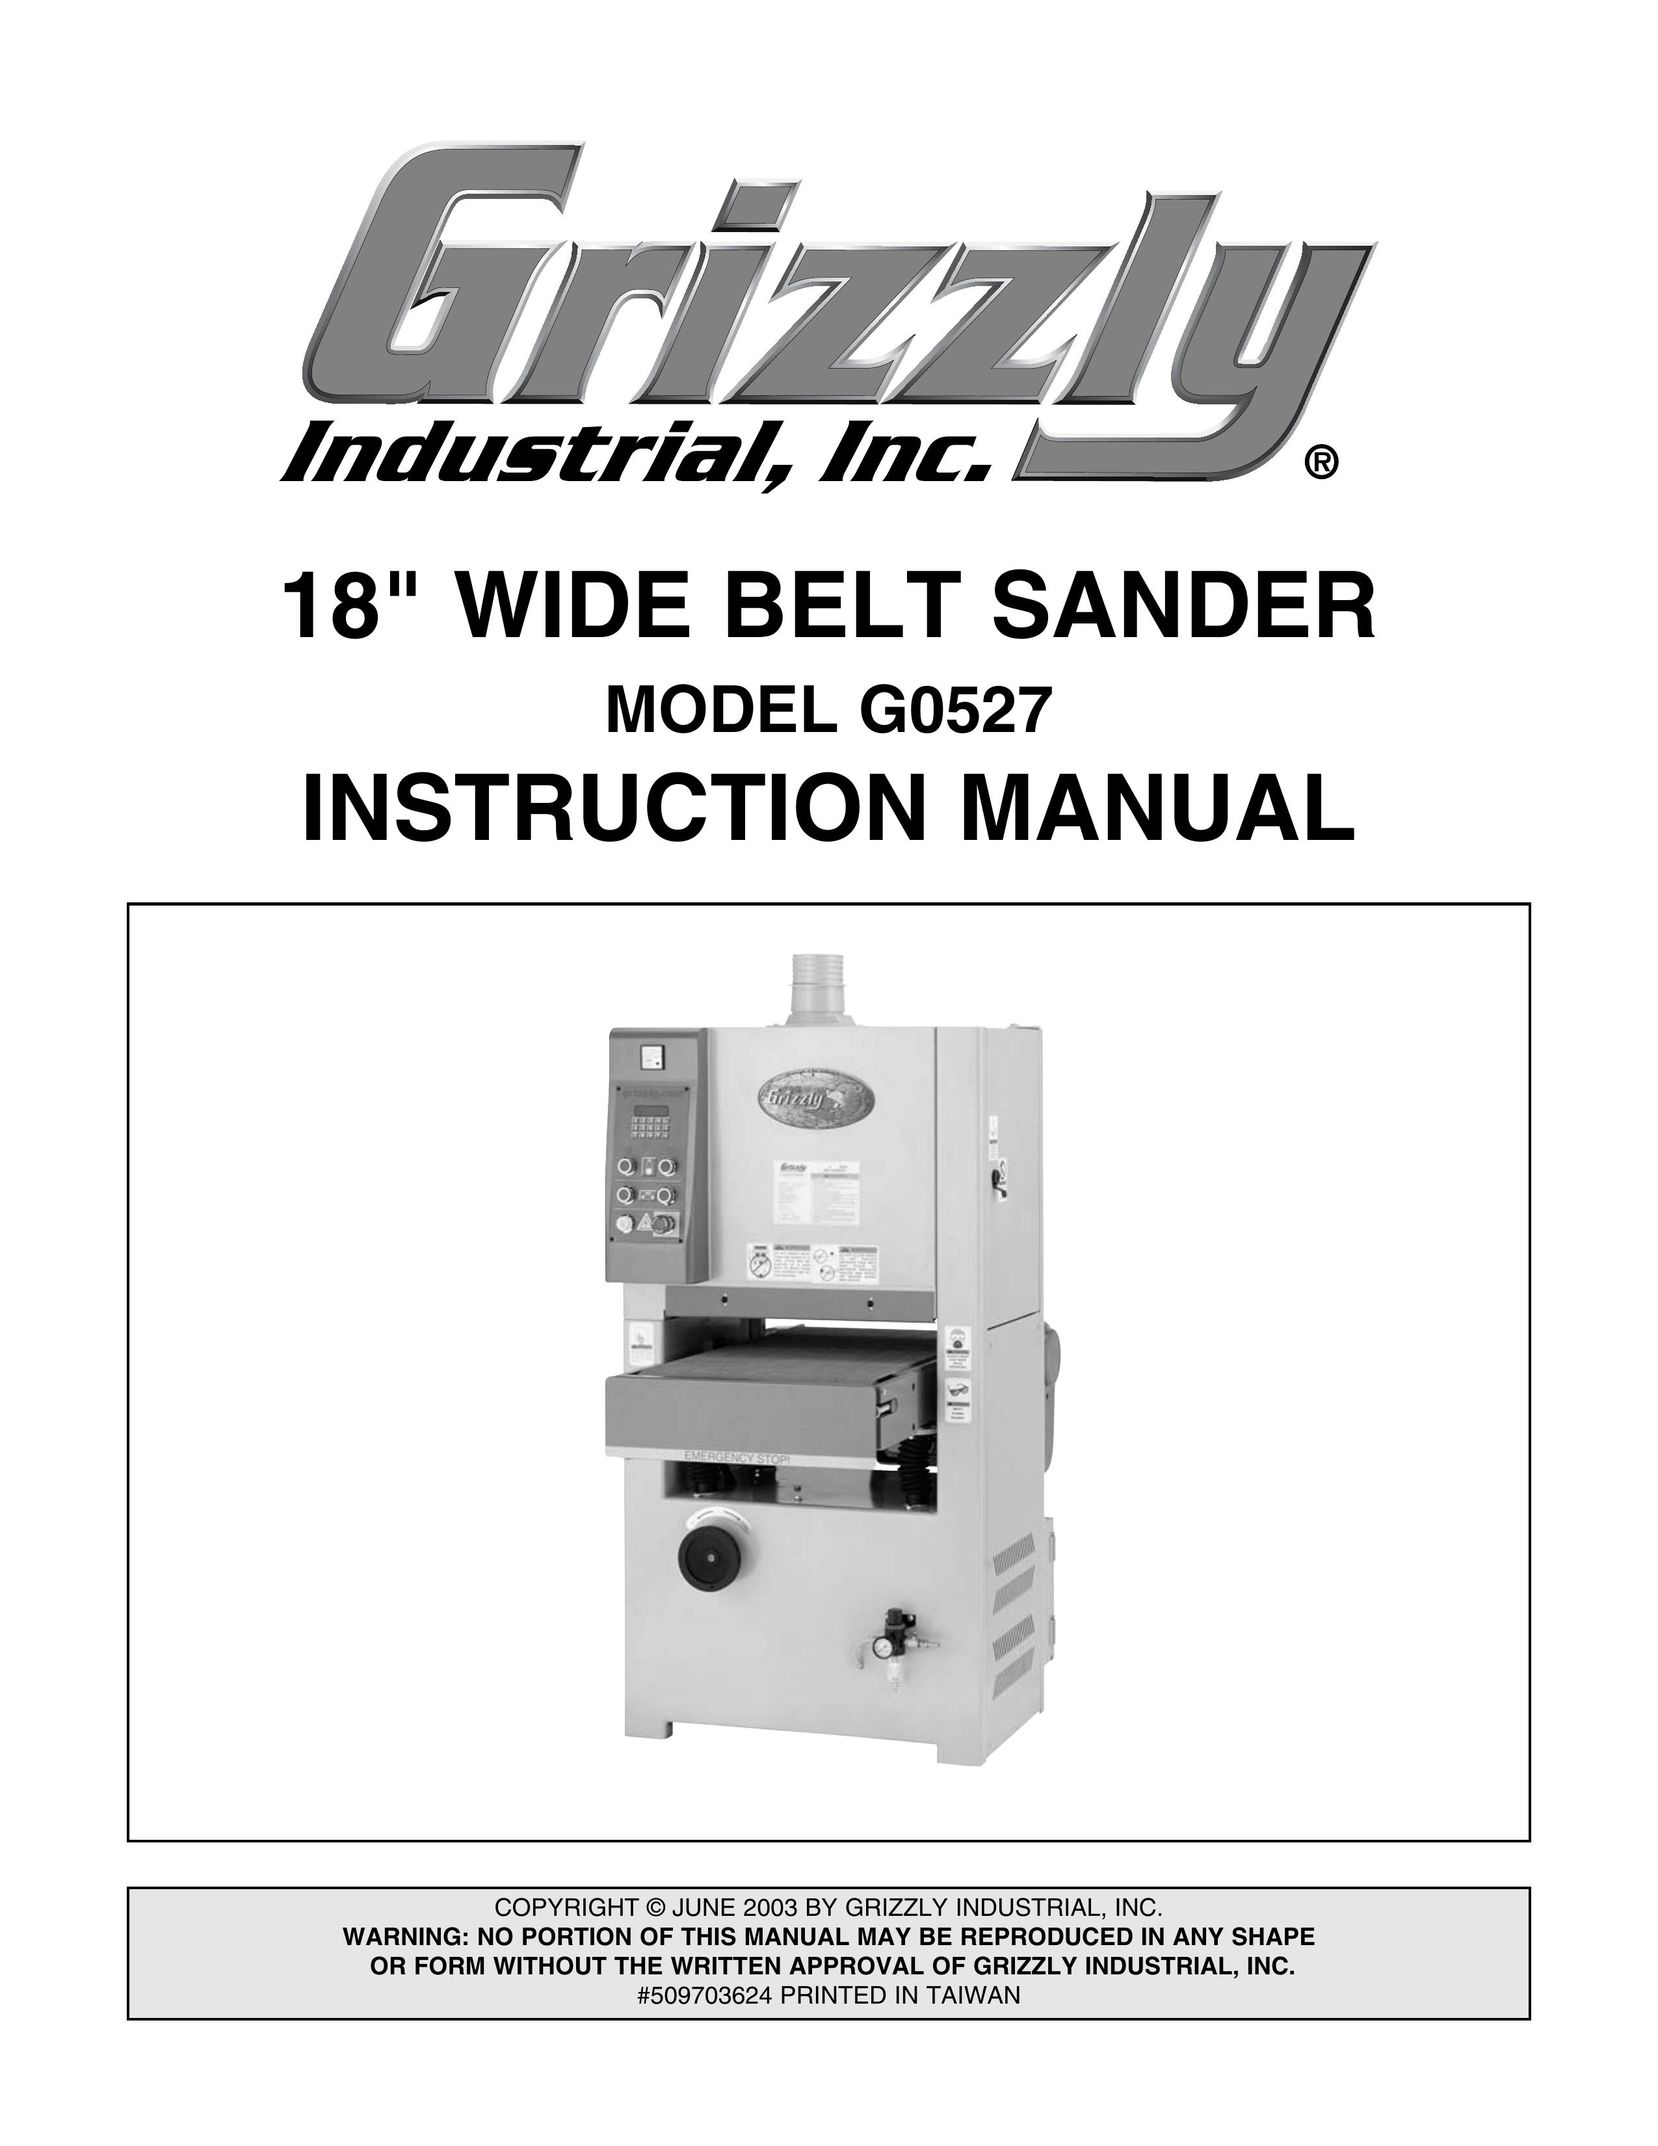 Grizzly G0527 Sander User Manual